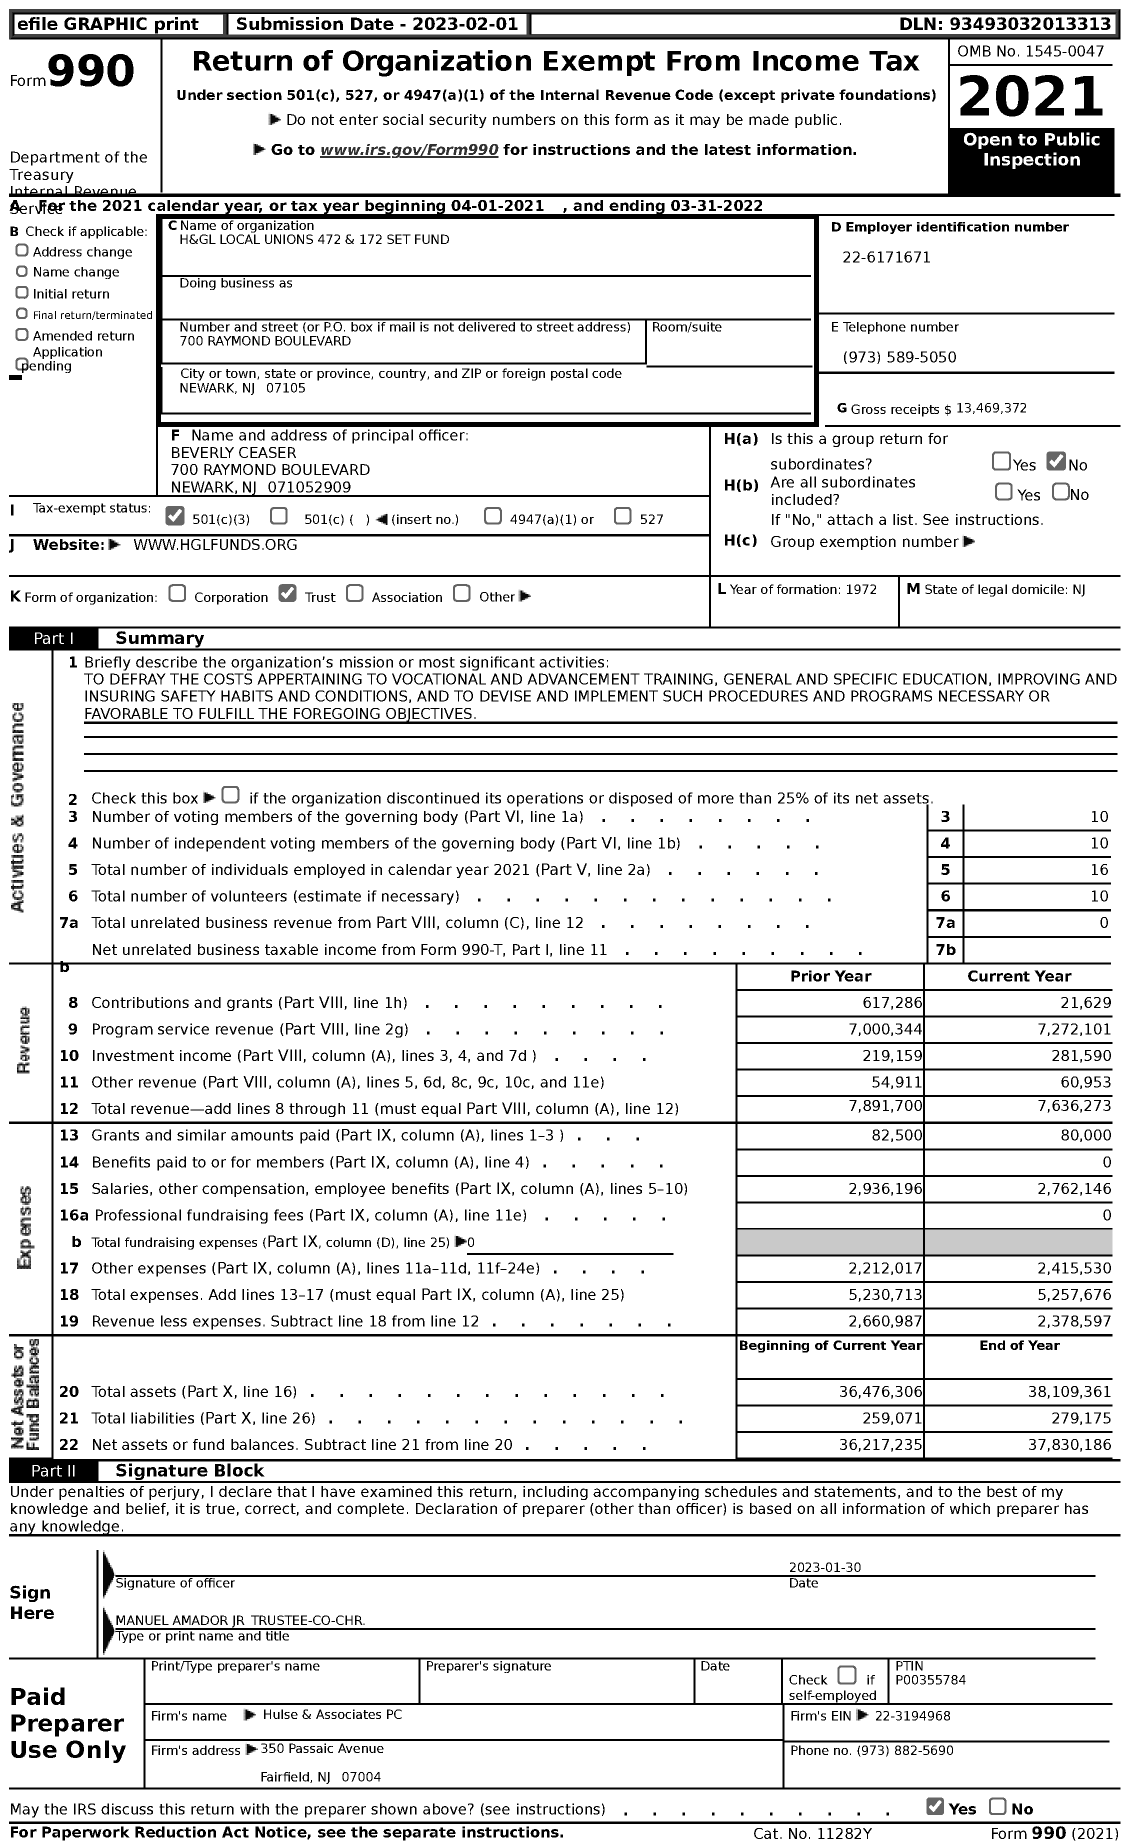 Image of first page of 2021 Form 990 for Heavy and General Laborers' Local Unions 472 and 172 Safety Education and Training Fund Set Fund